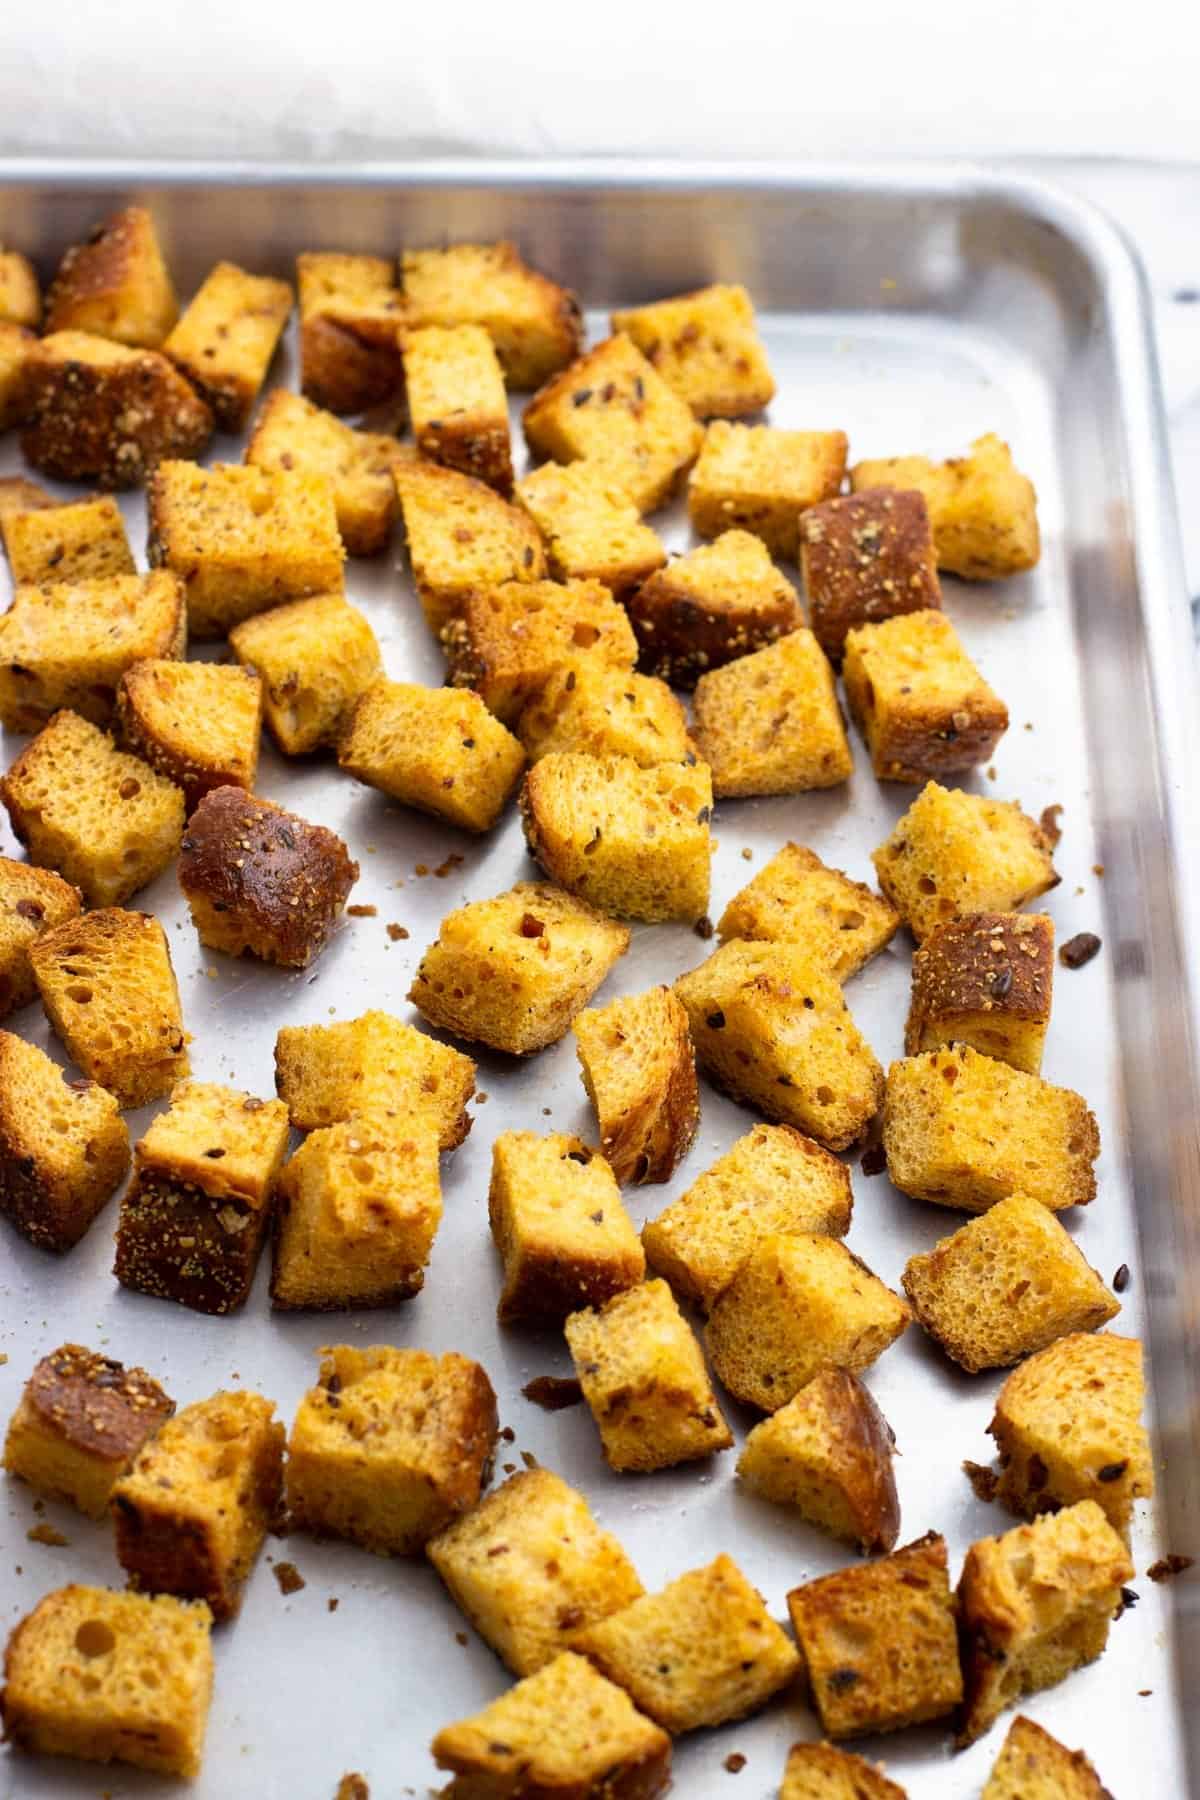 Baked croutons on a rimmed baking sheet.